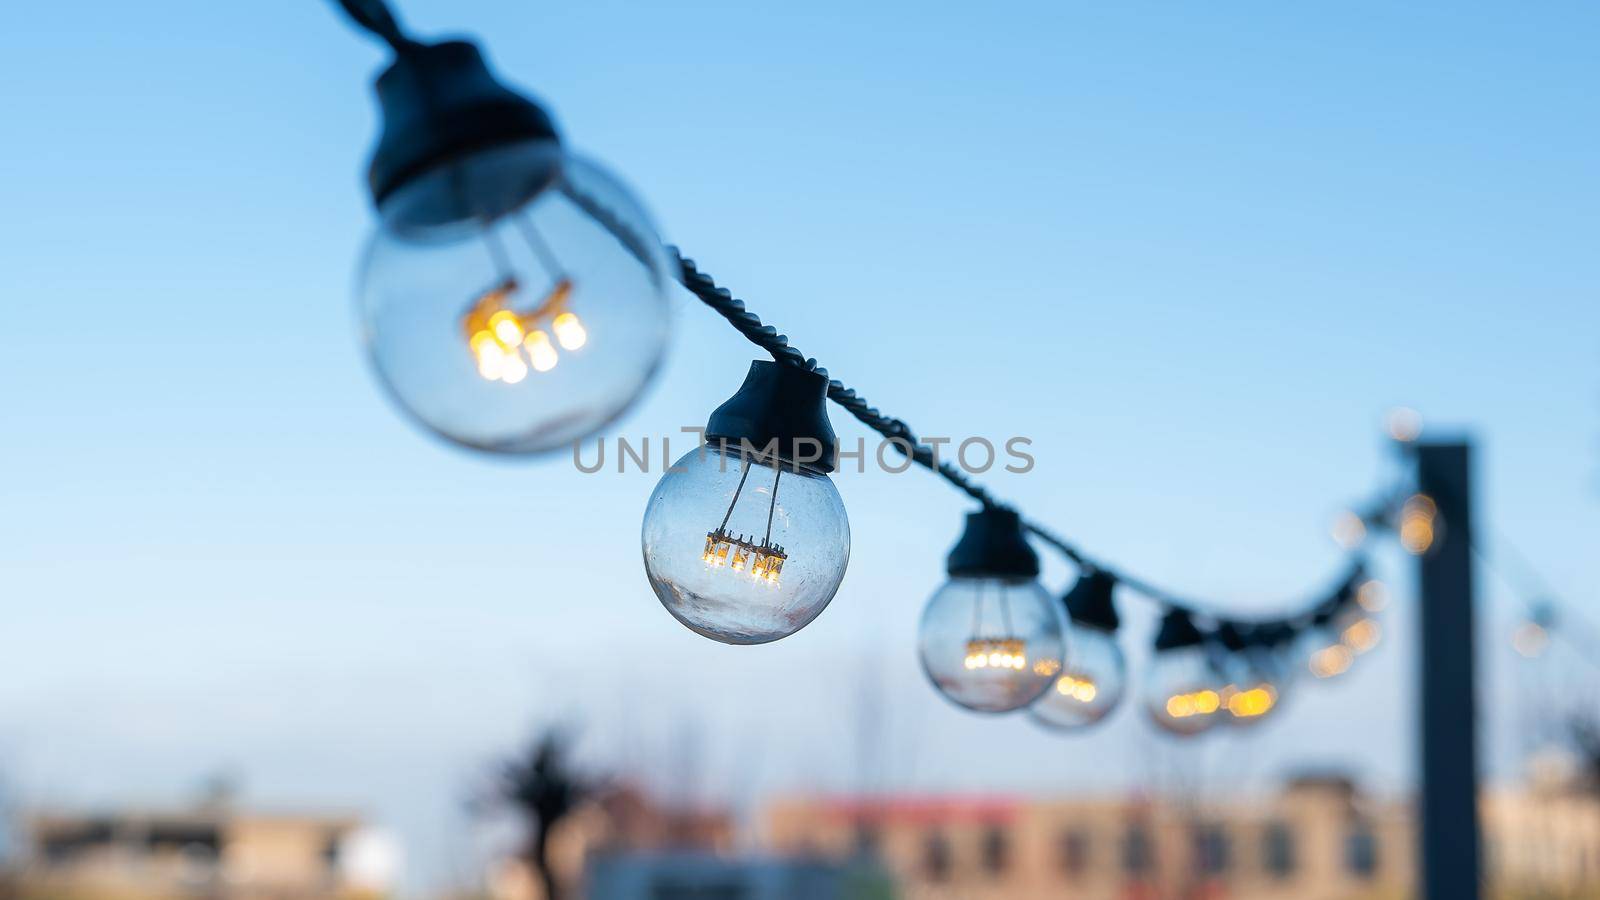 Garland of light bulbs in the park